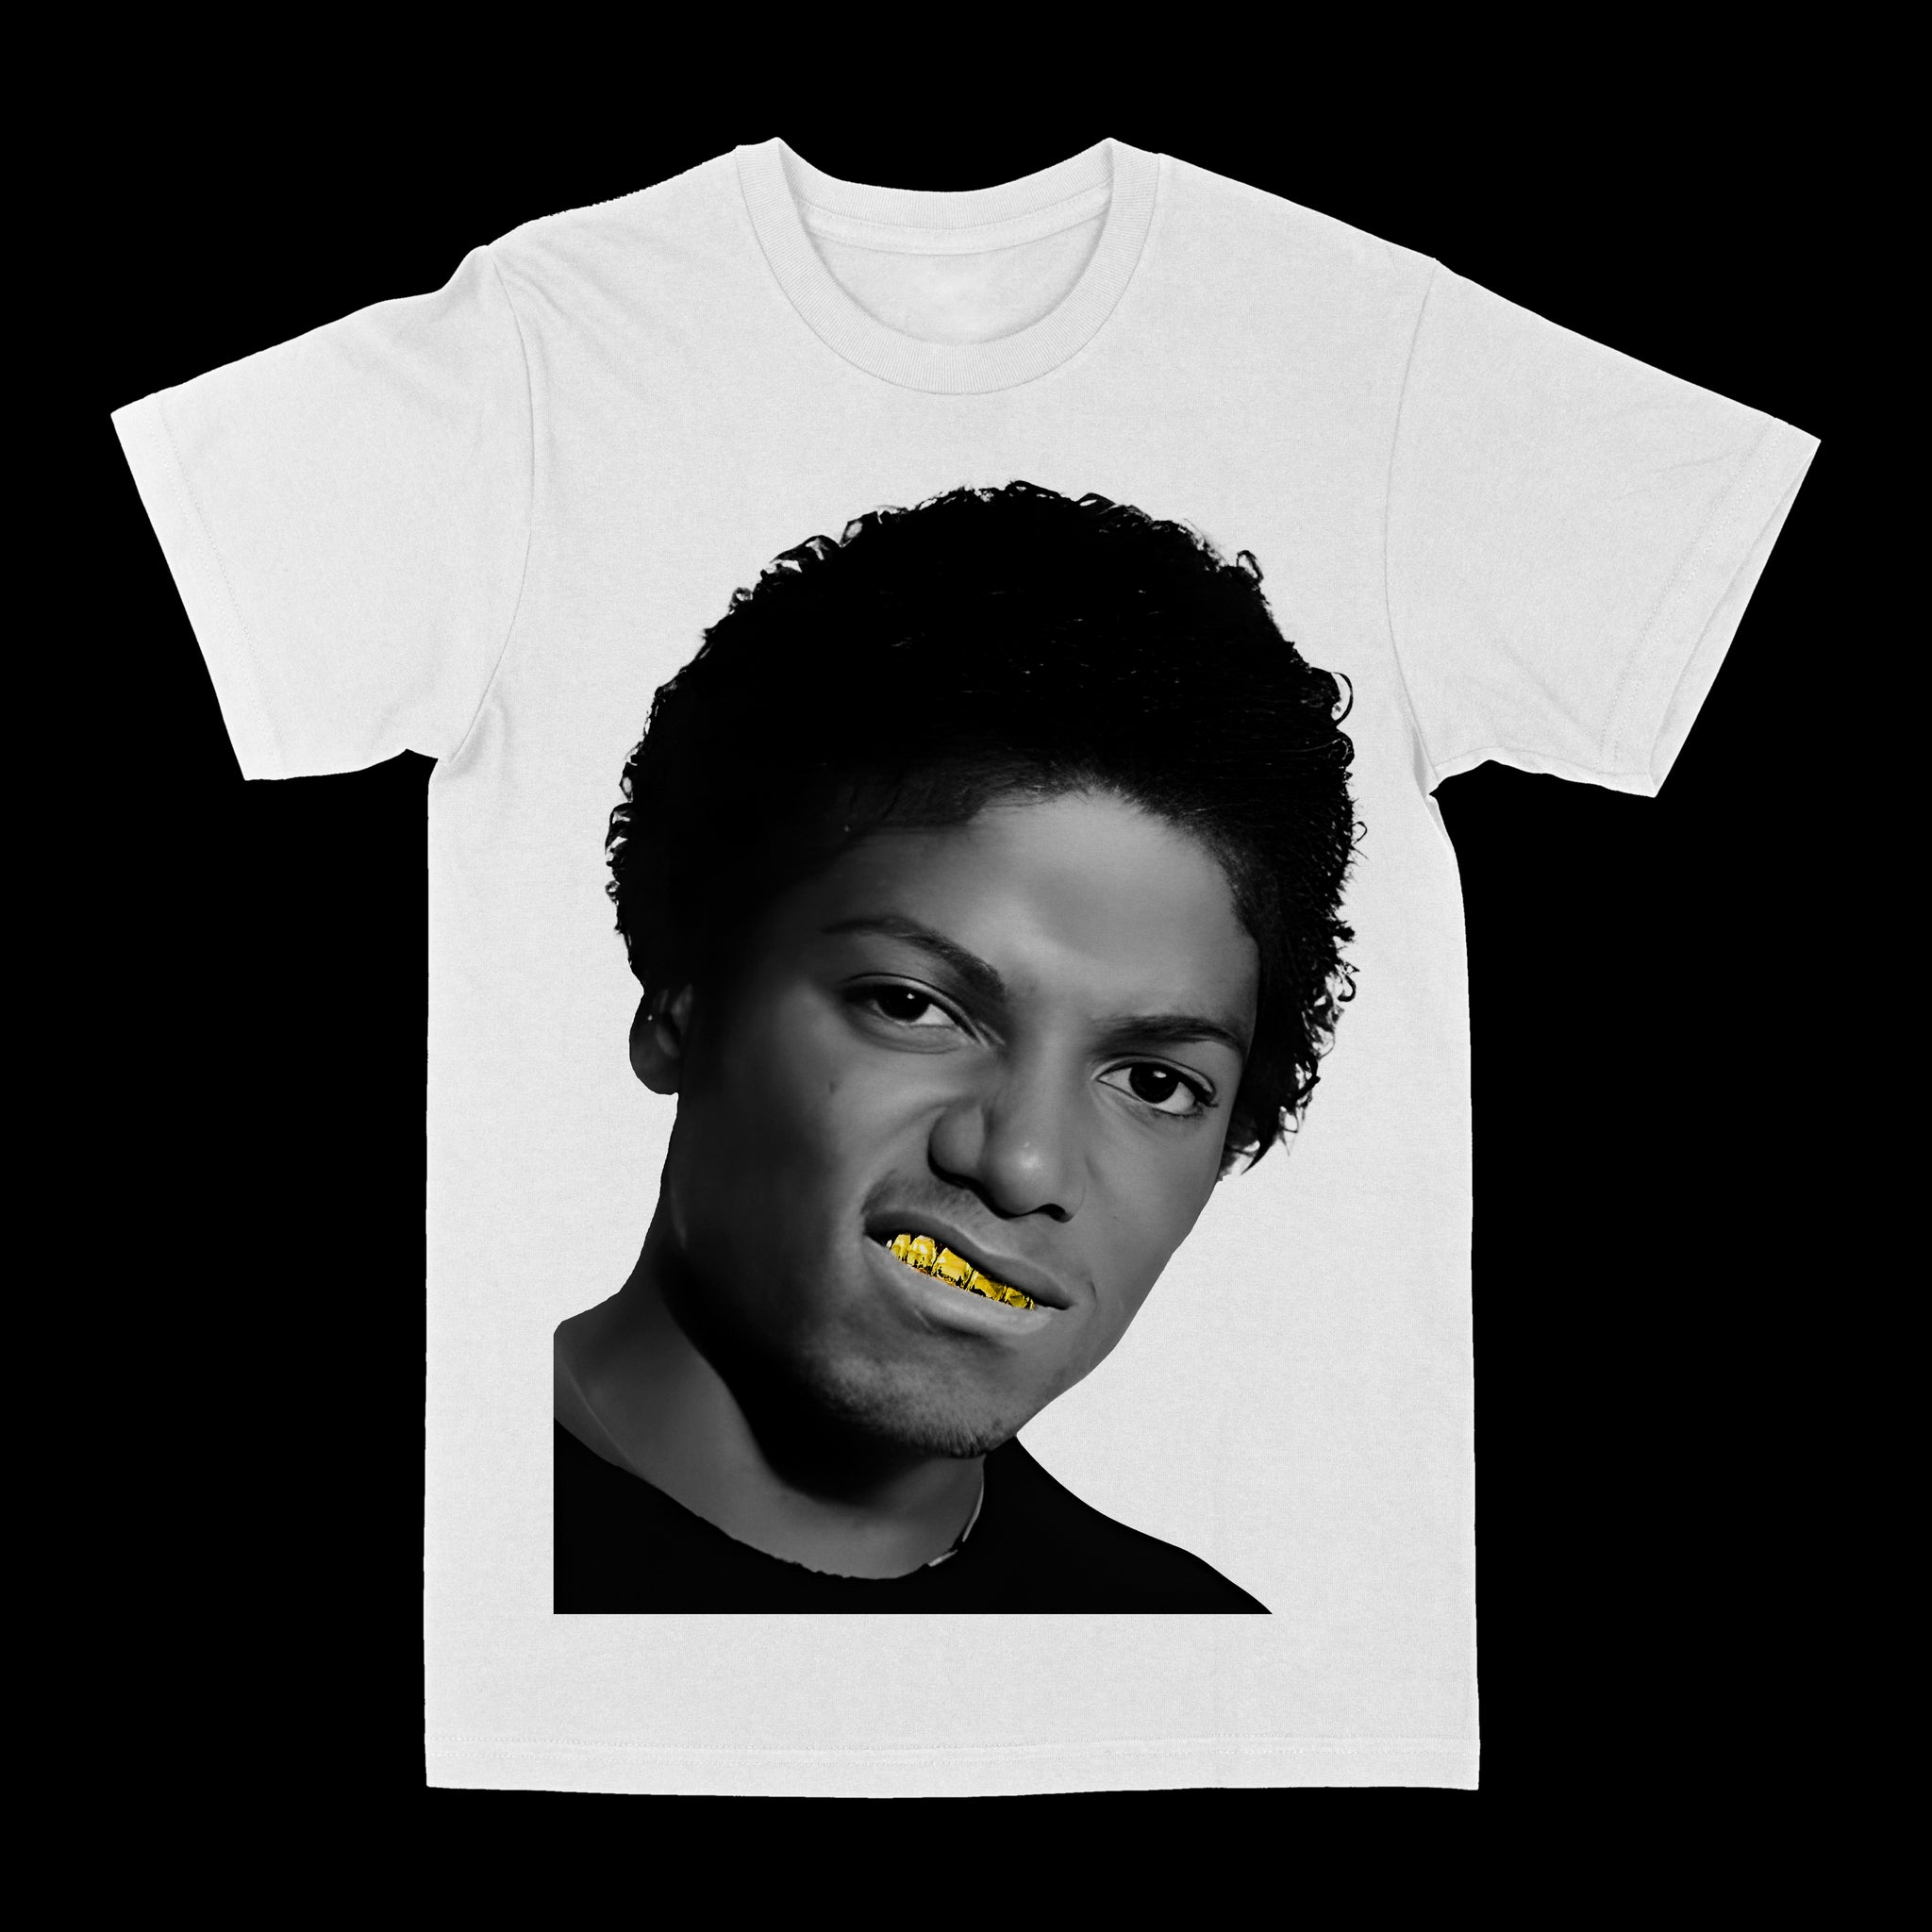 Michael Jackson "Gold Grill" Graphic Tee